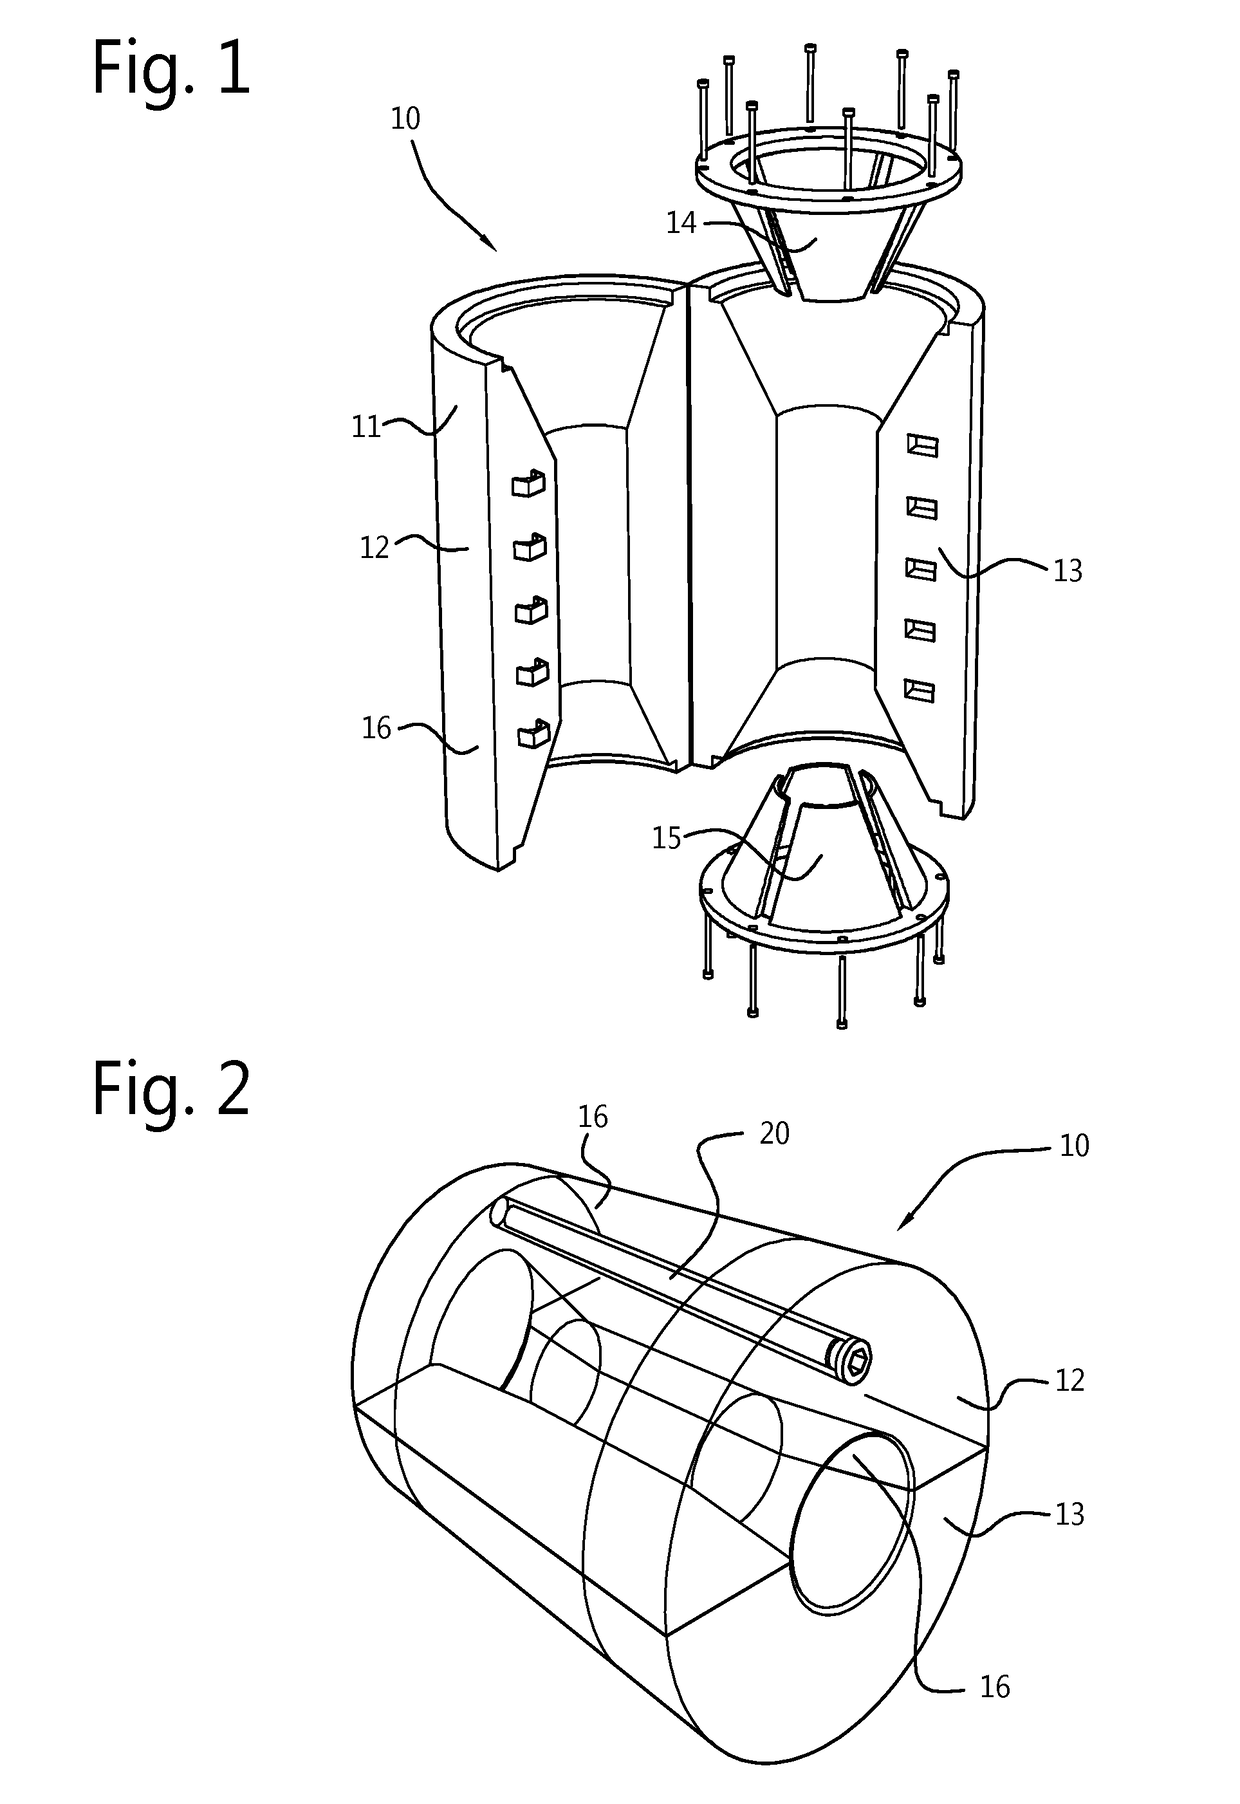 Assembly of a buoyancy module and an Anti-fouling system